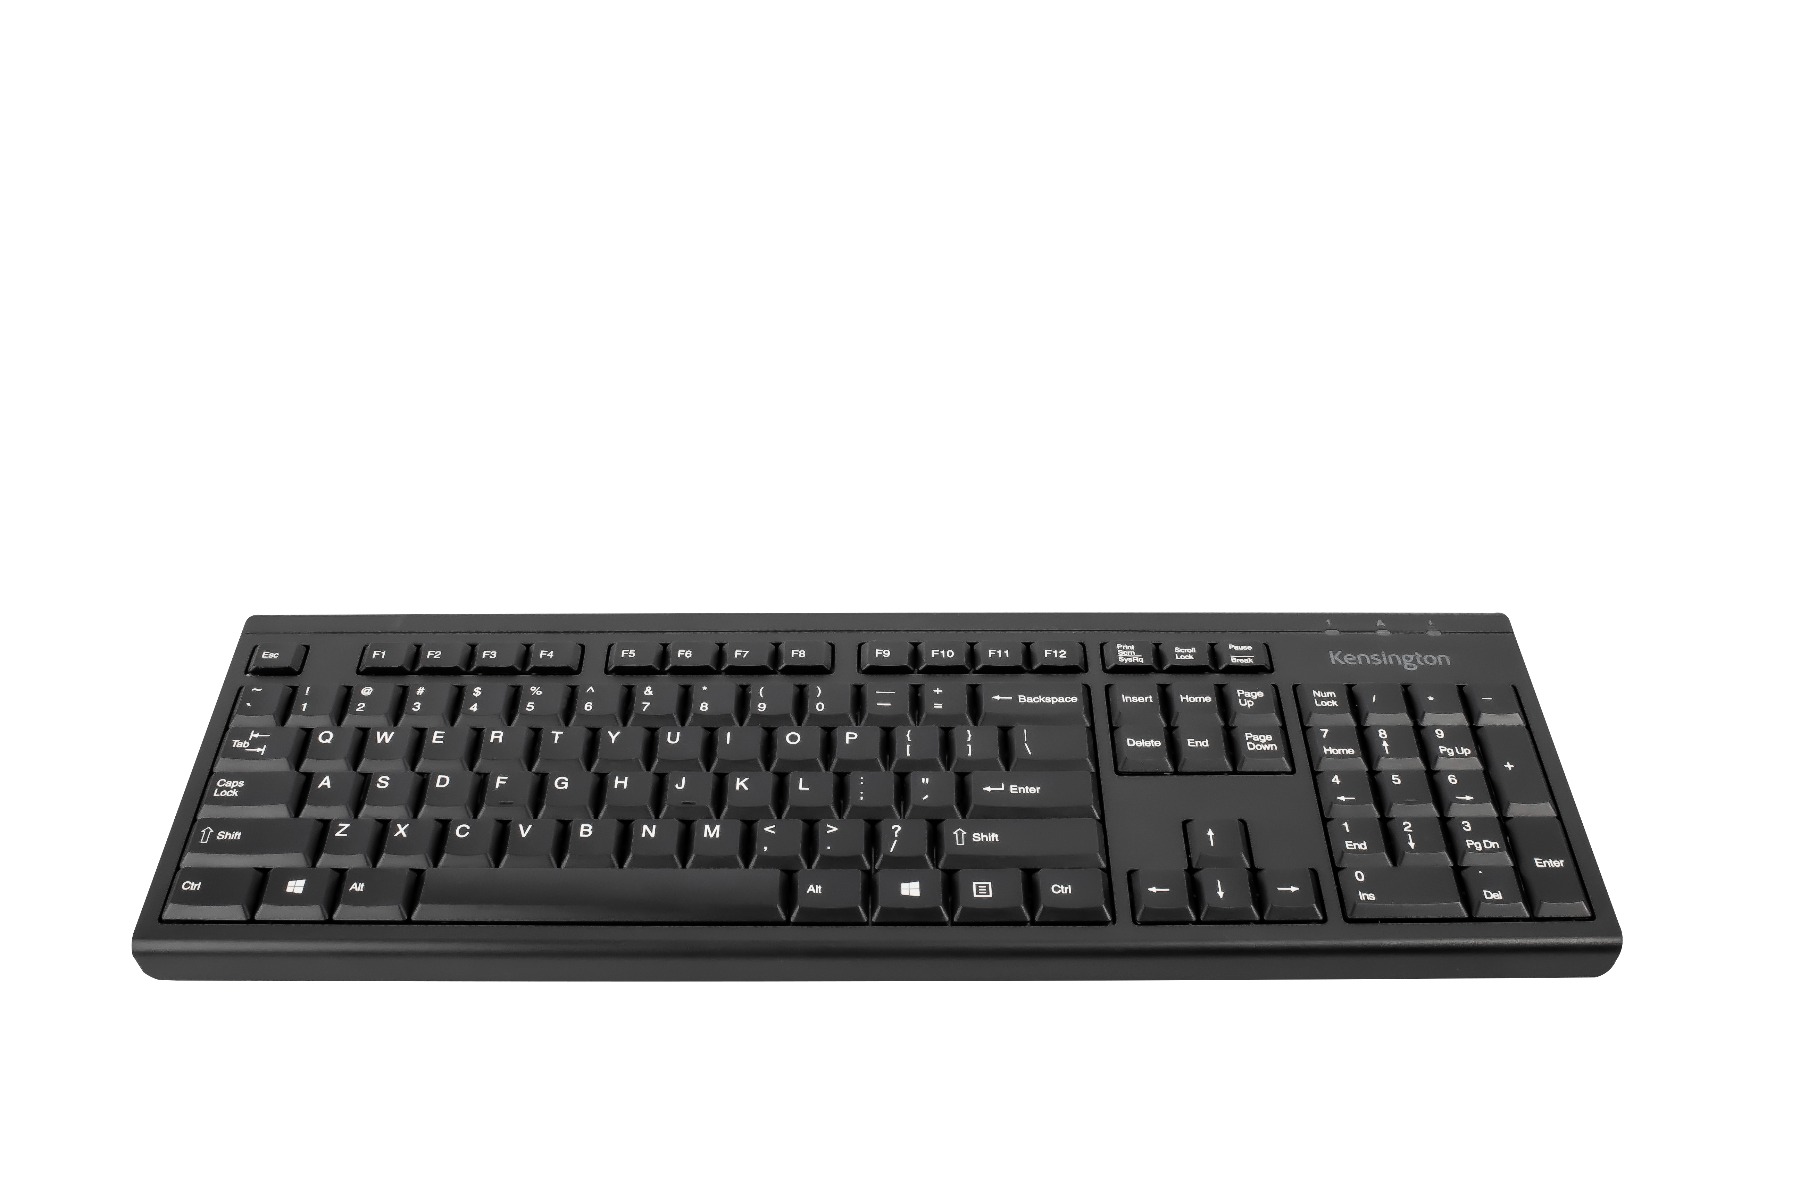 Keyboard Covers & Protectors | Protect Covers